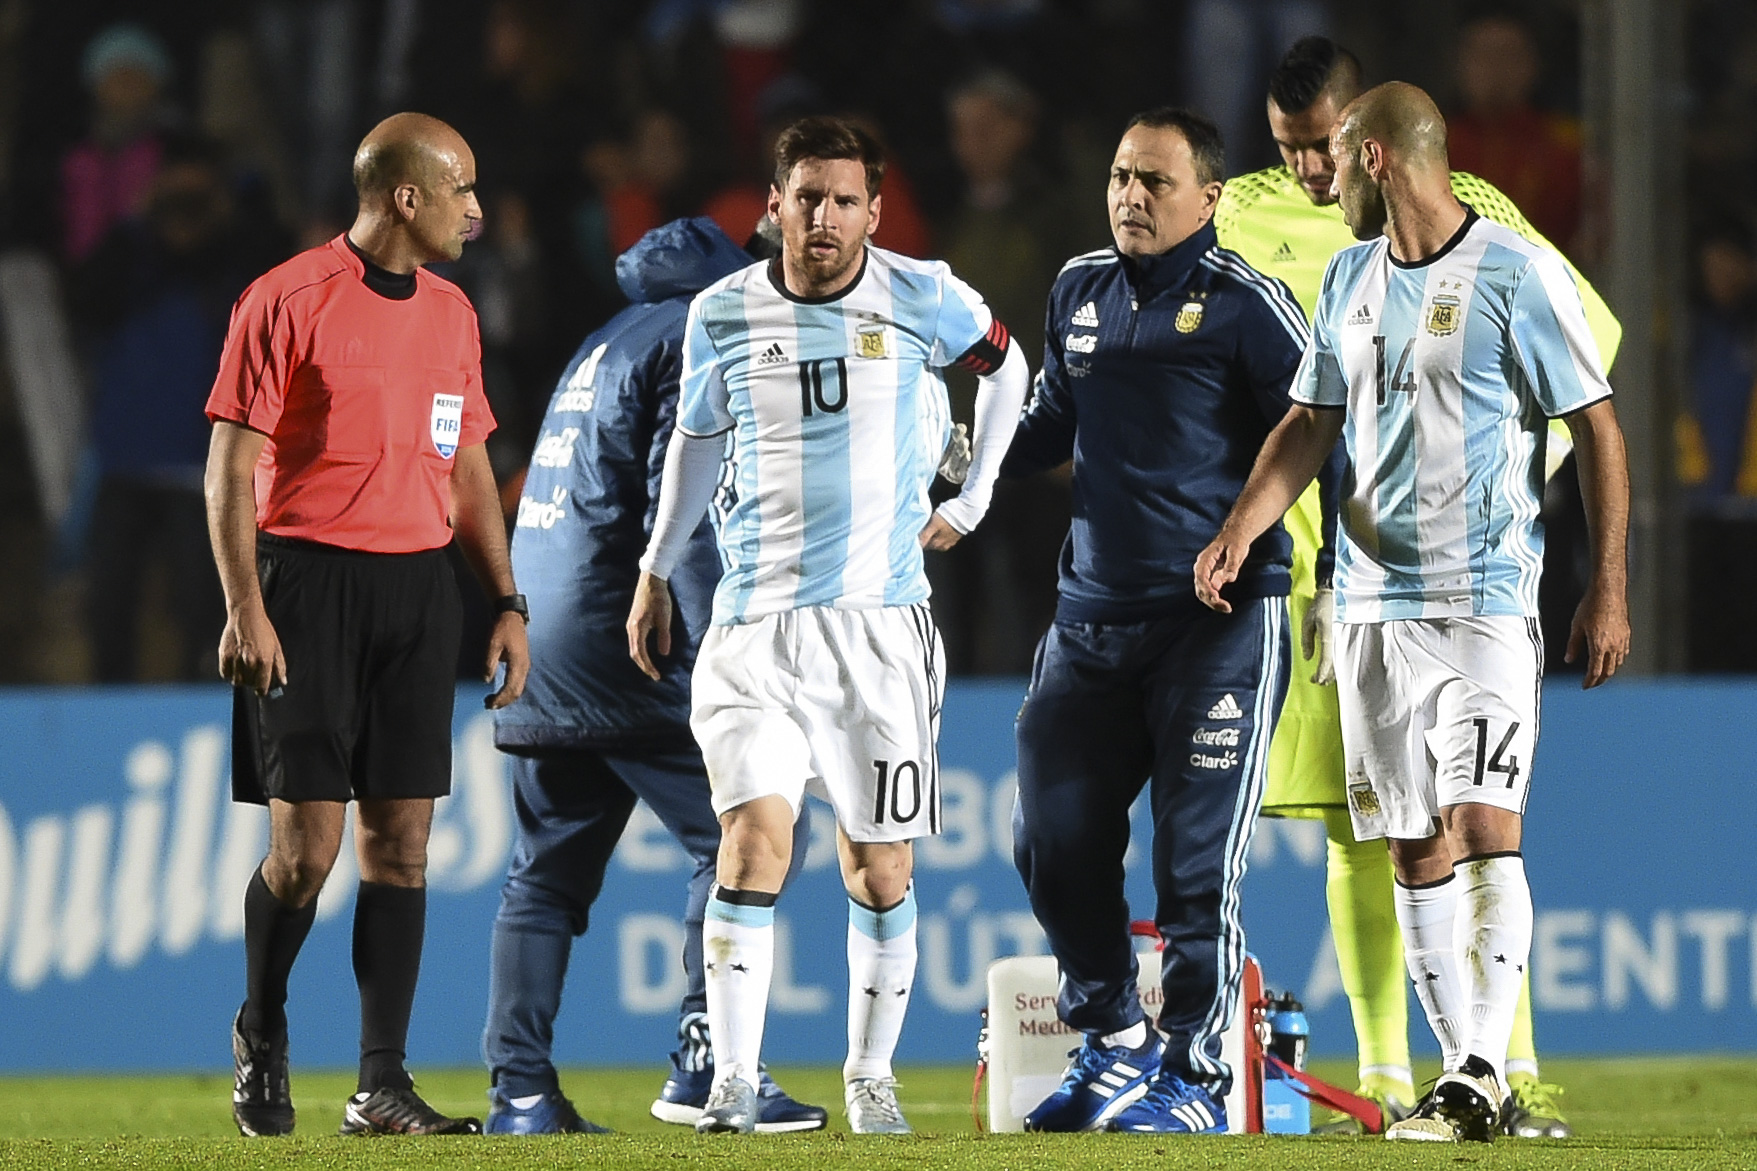 Copa America: Messi worries Argentina with back injury